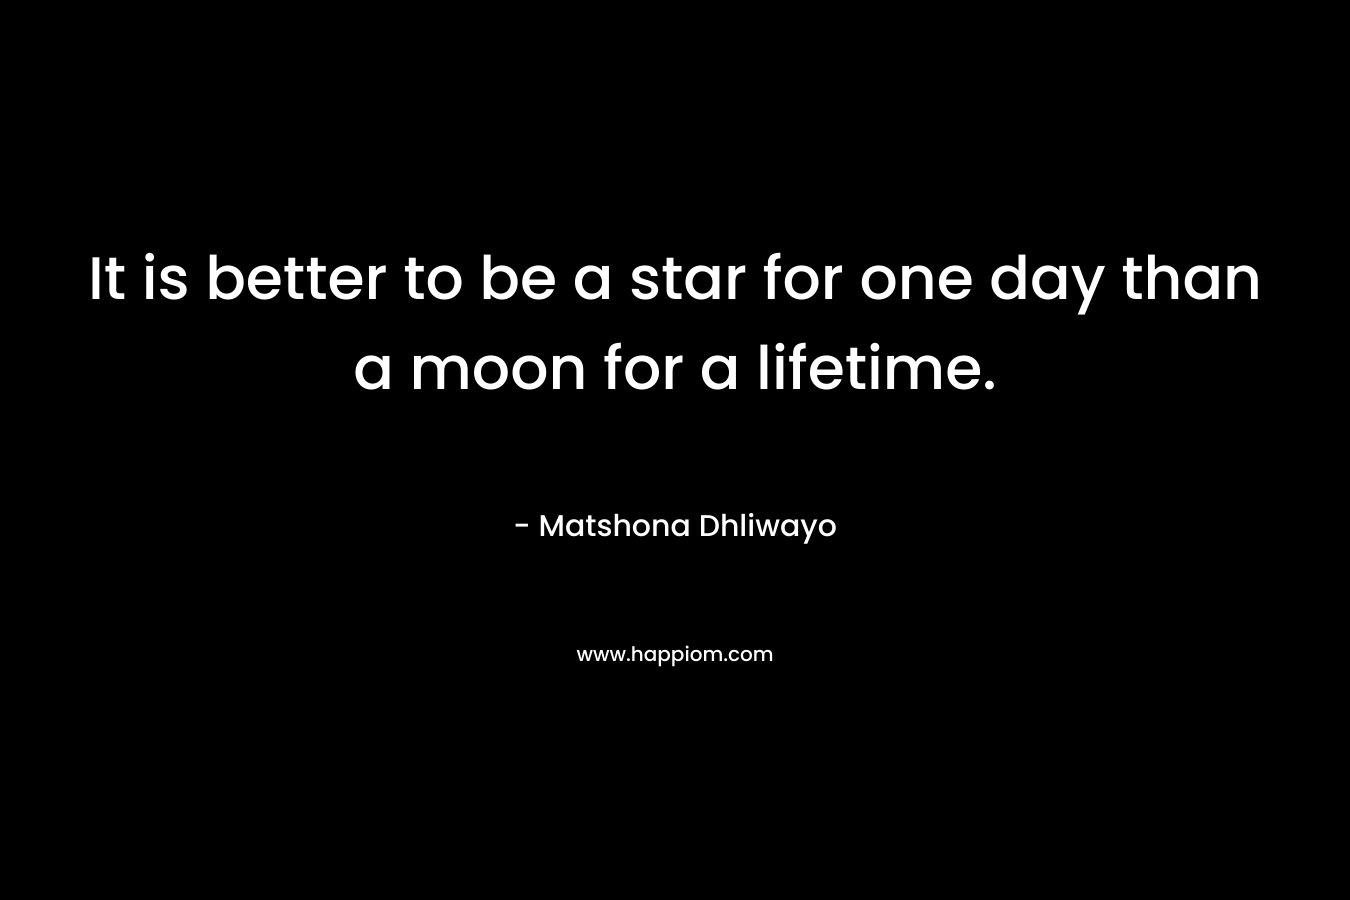 It is better to be a star for one day than a moon for a lifetime.